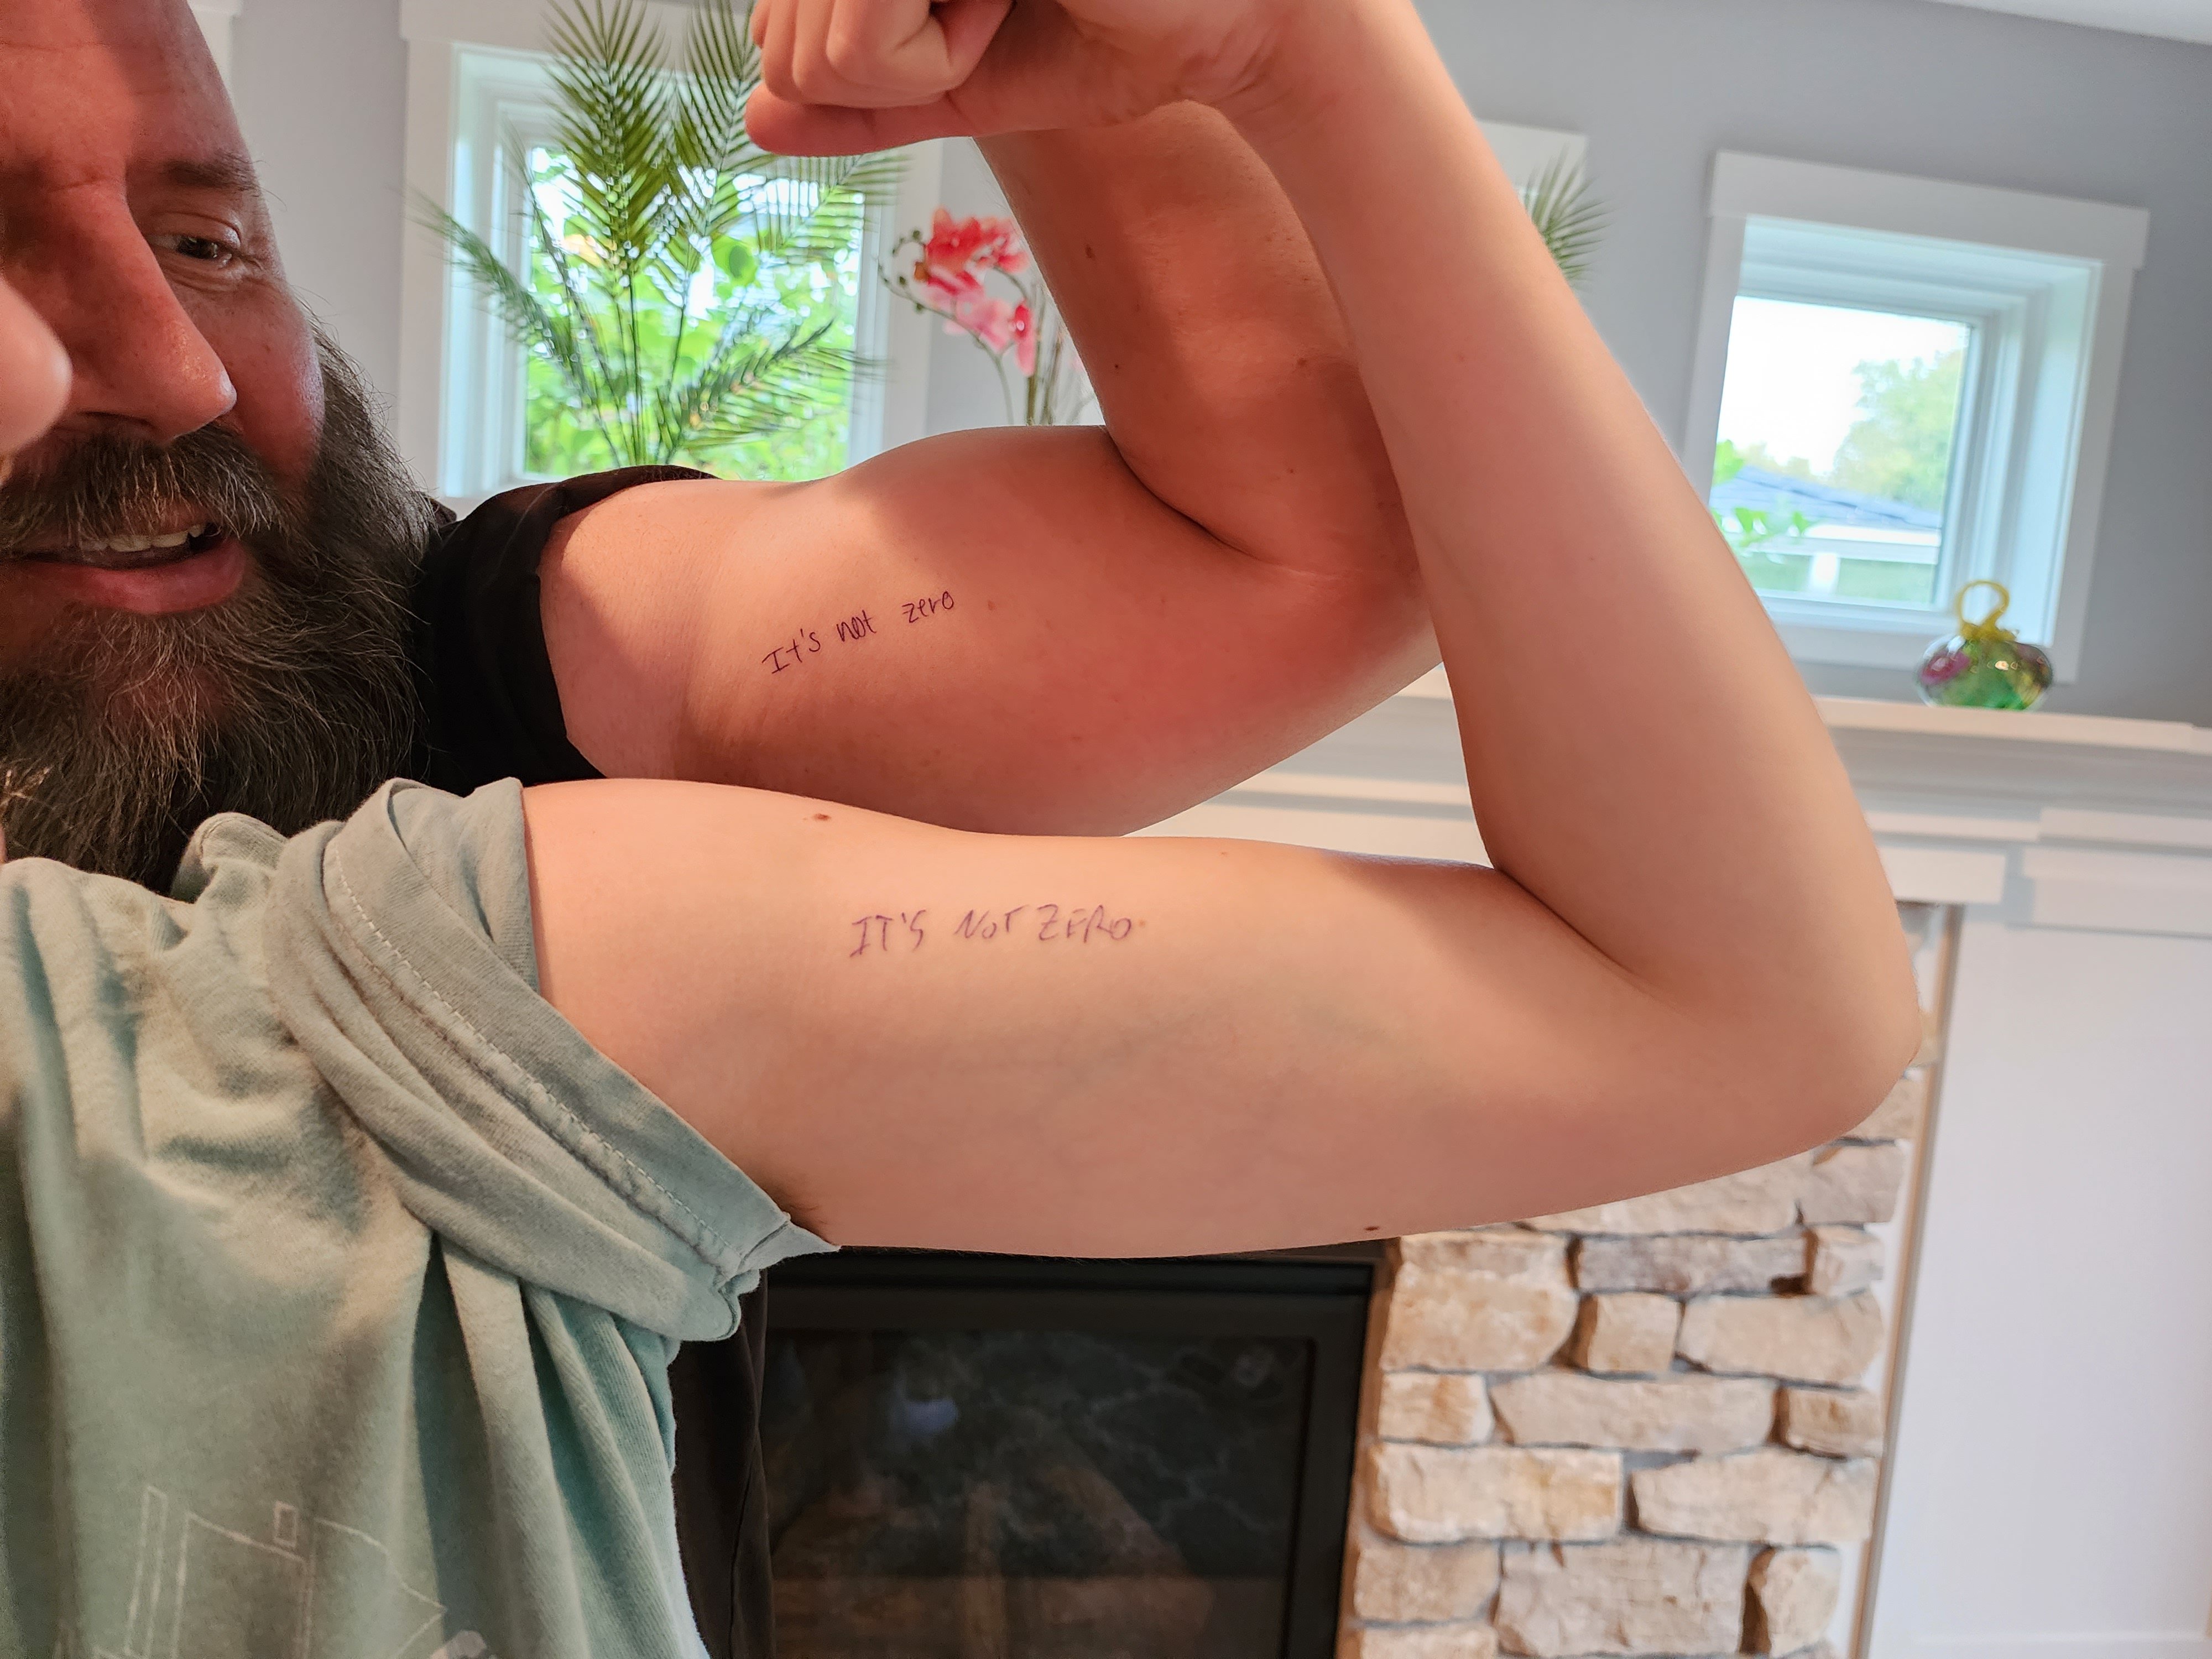 Jeff McComas and his 17 year old daughter showing their matching tattoos.